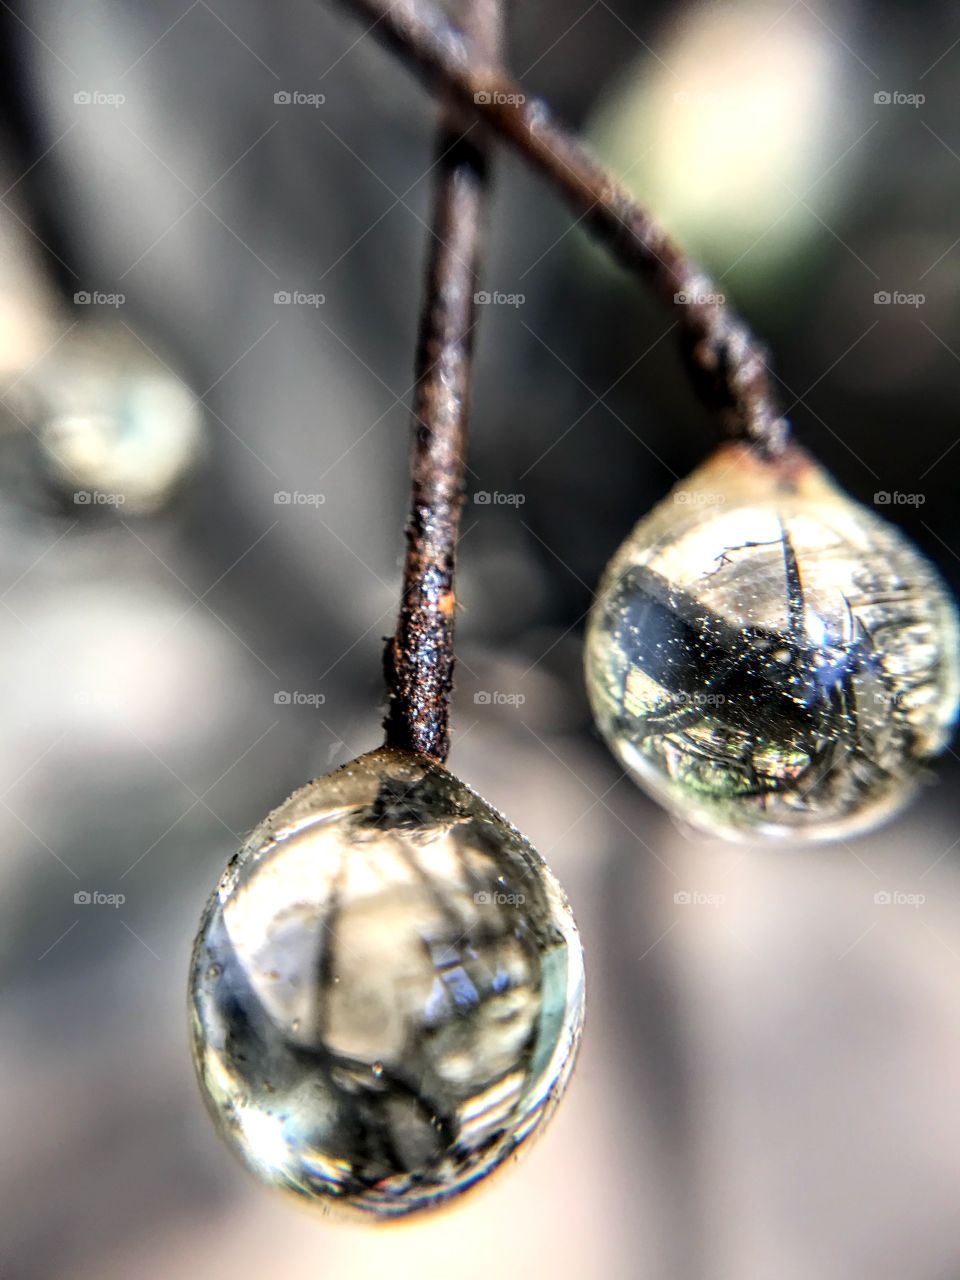 Reflections in glass bauble